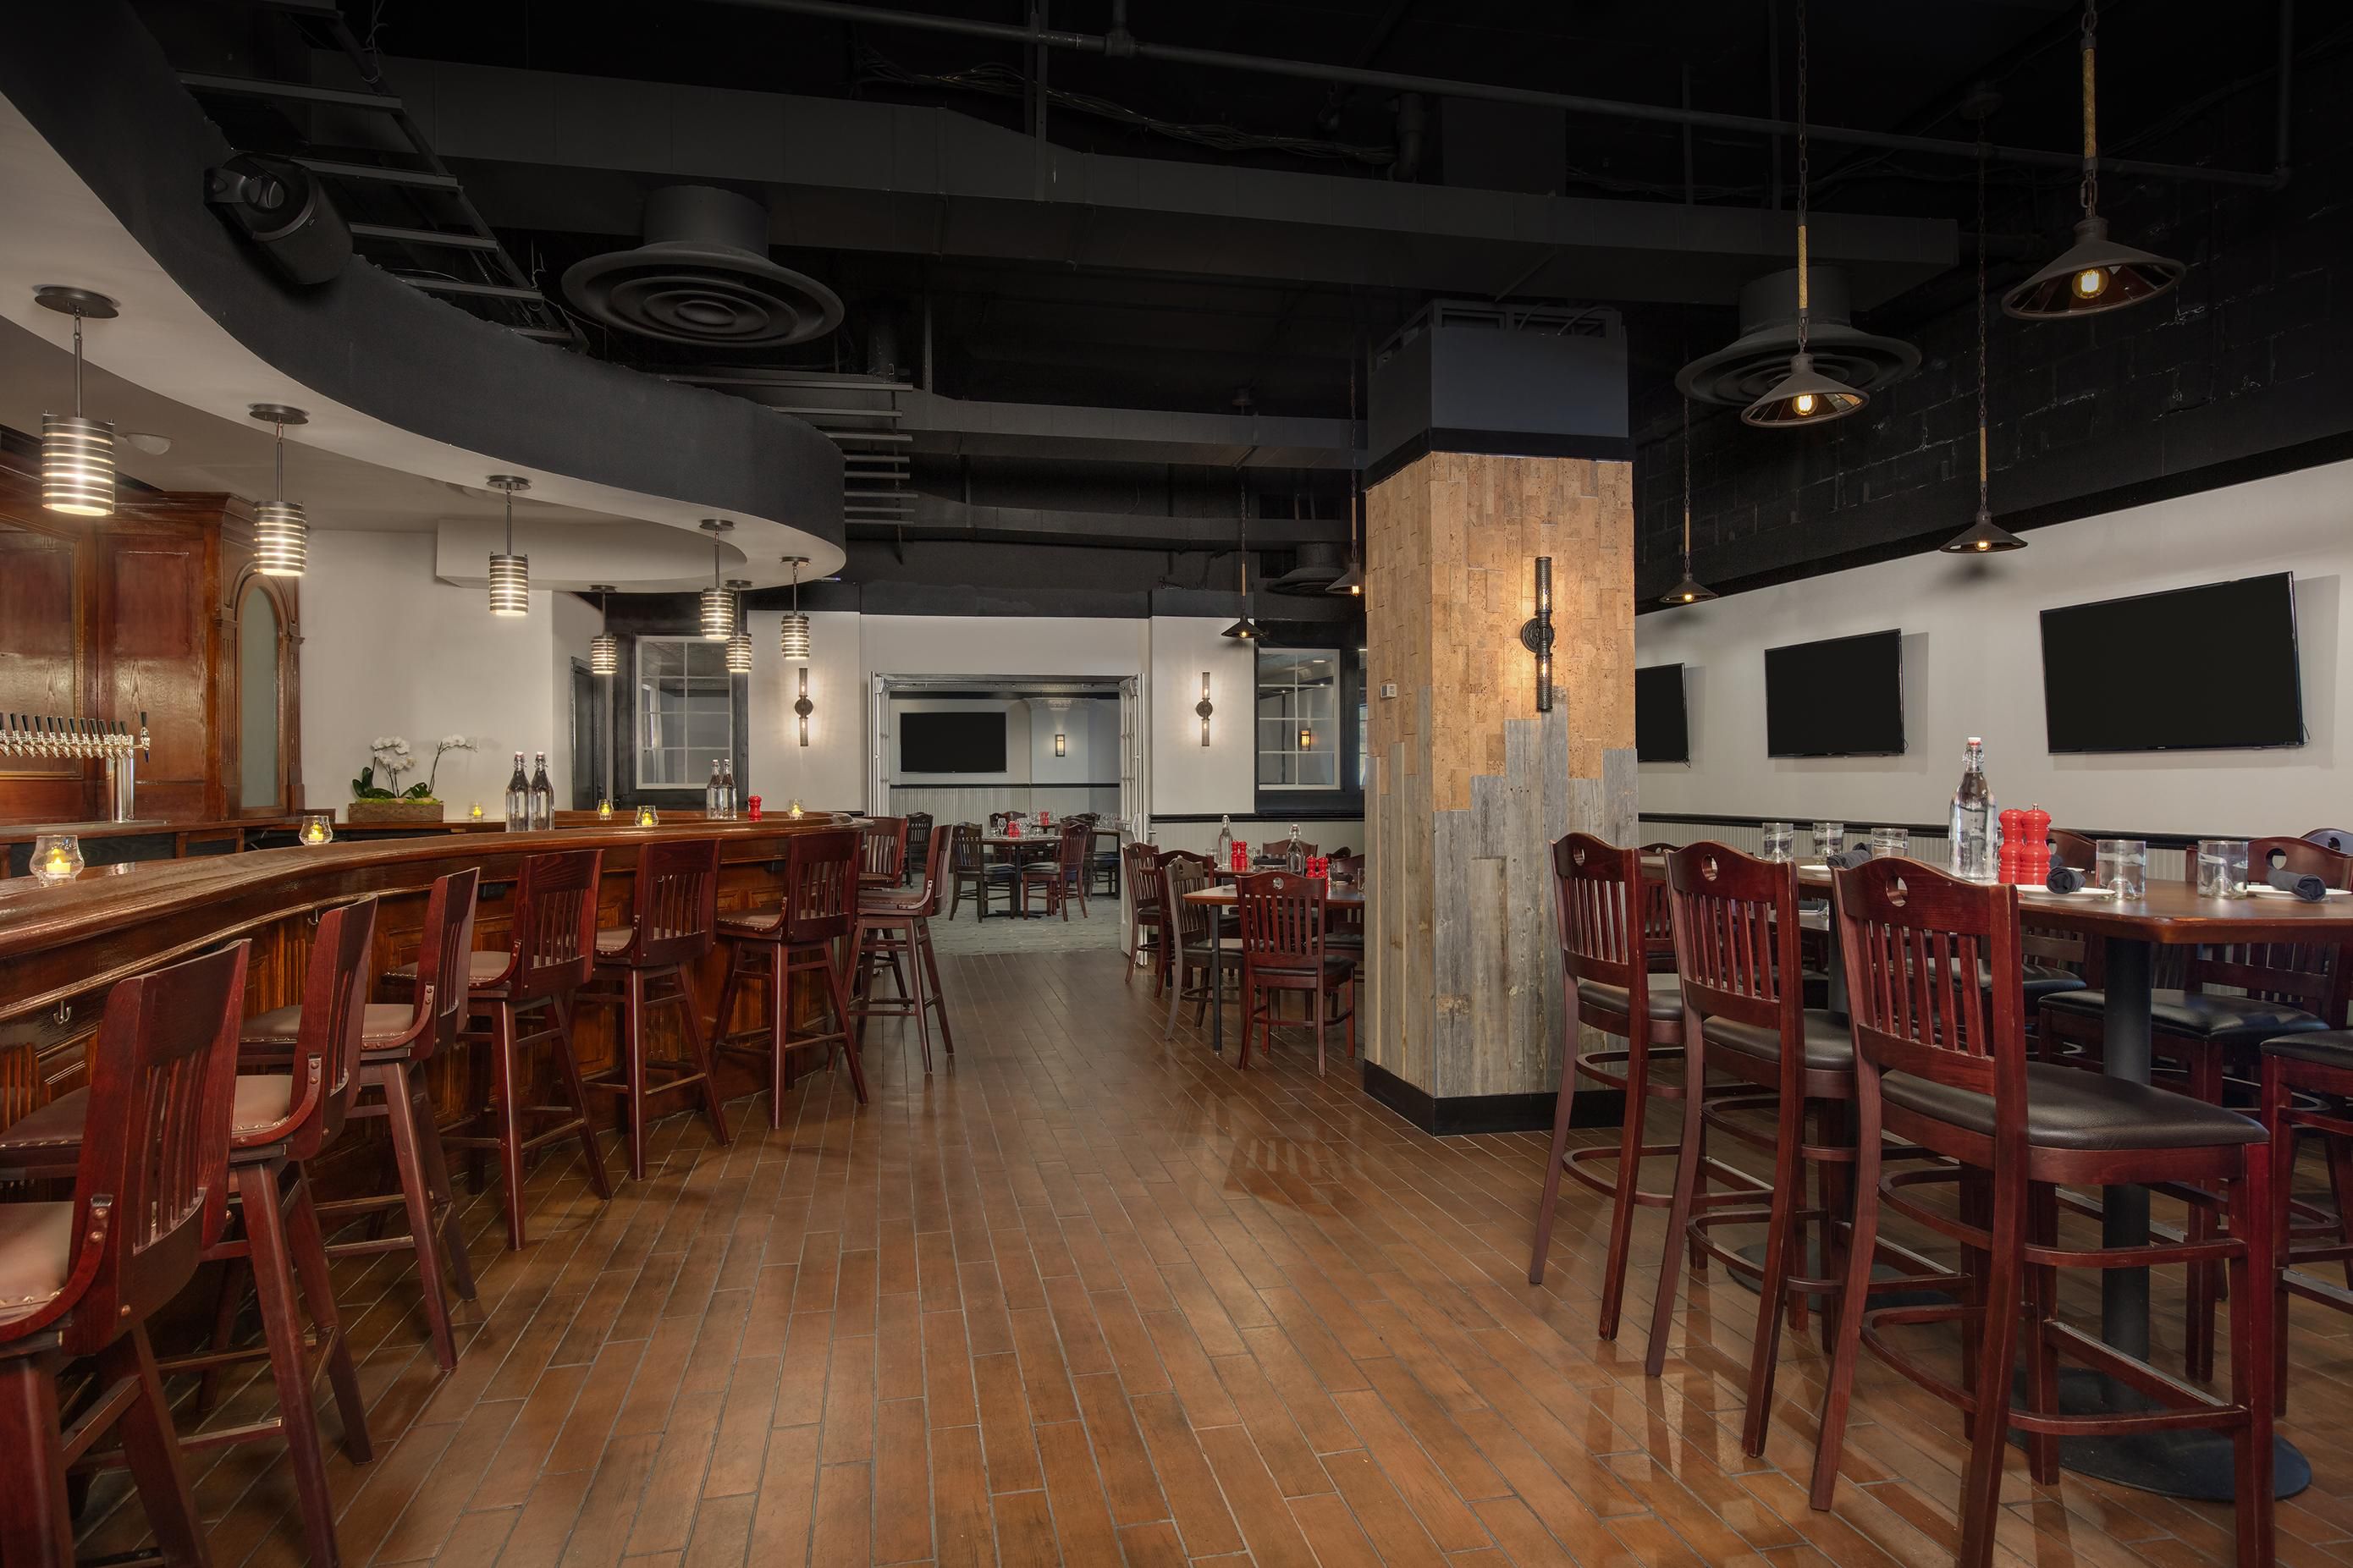 Potomac Social Tavern offers diners plenty of well-spaced seating.